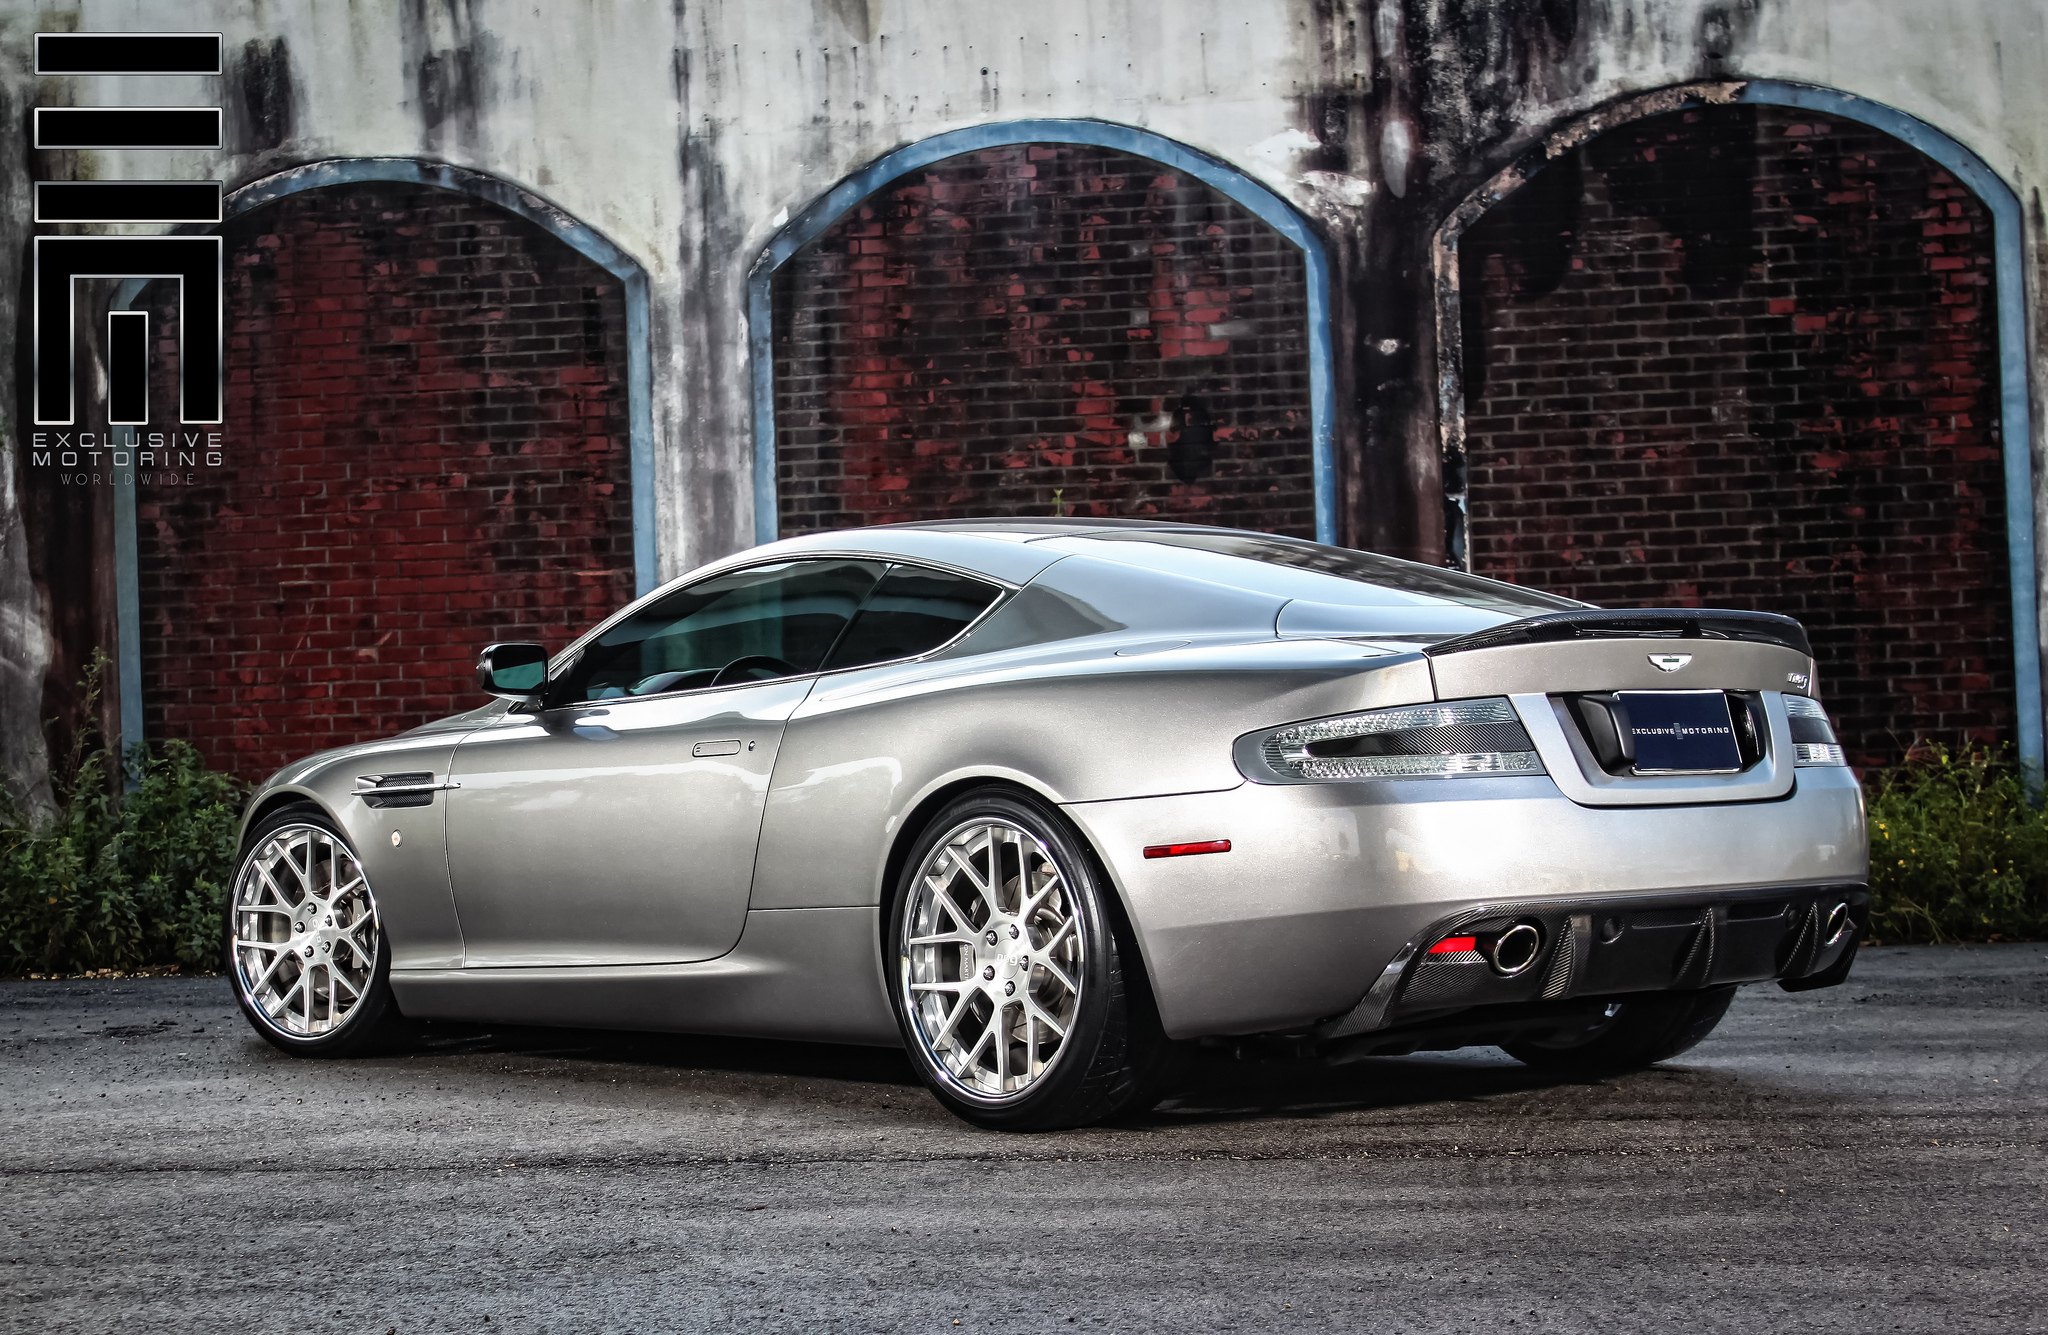 Exclusive Motoring Aston Martin side view - Photo by Exclusive Motoring